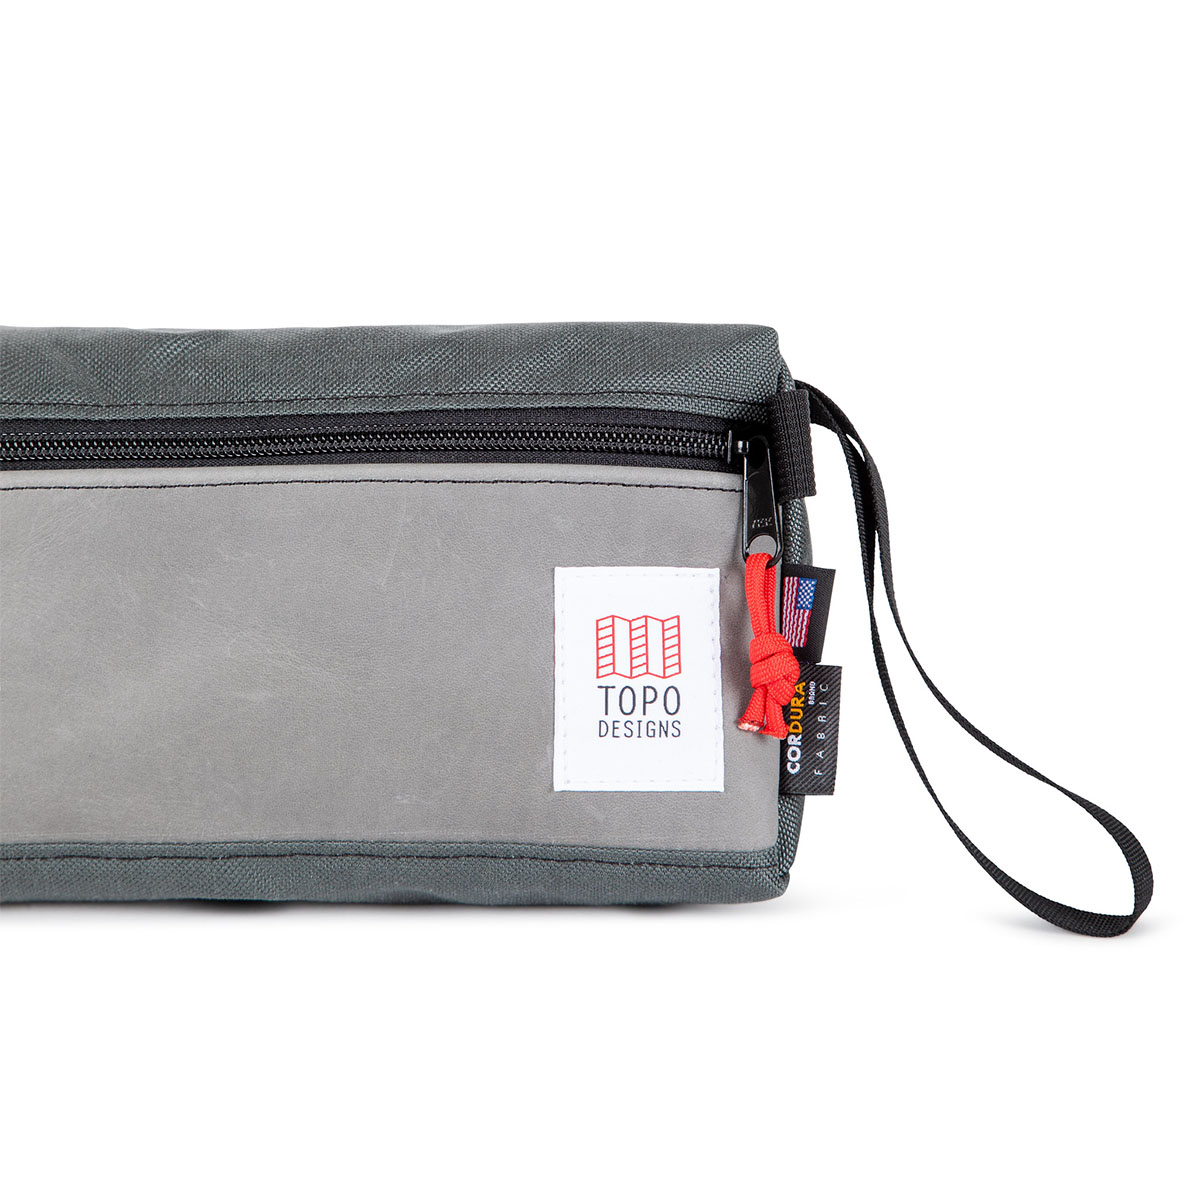 Topo Designs Dopp Kit Charcoal/Charcoal Leather, water-resistant, travel light, accessory bag